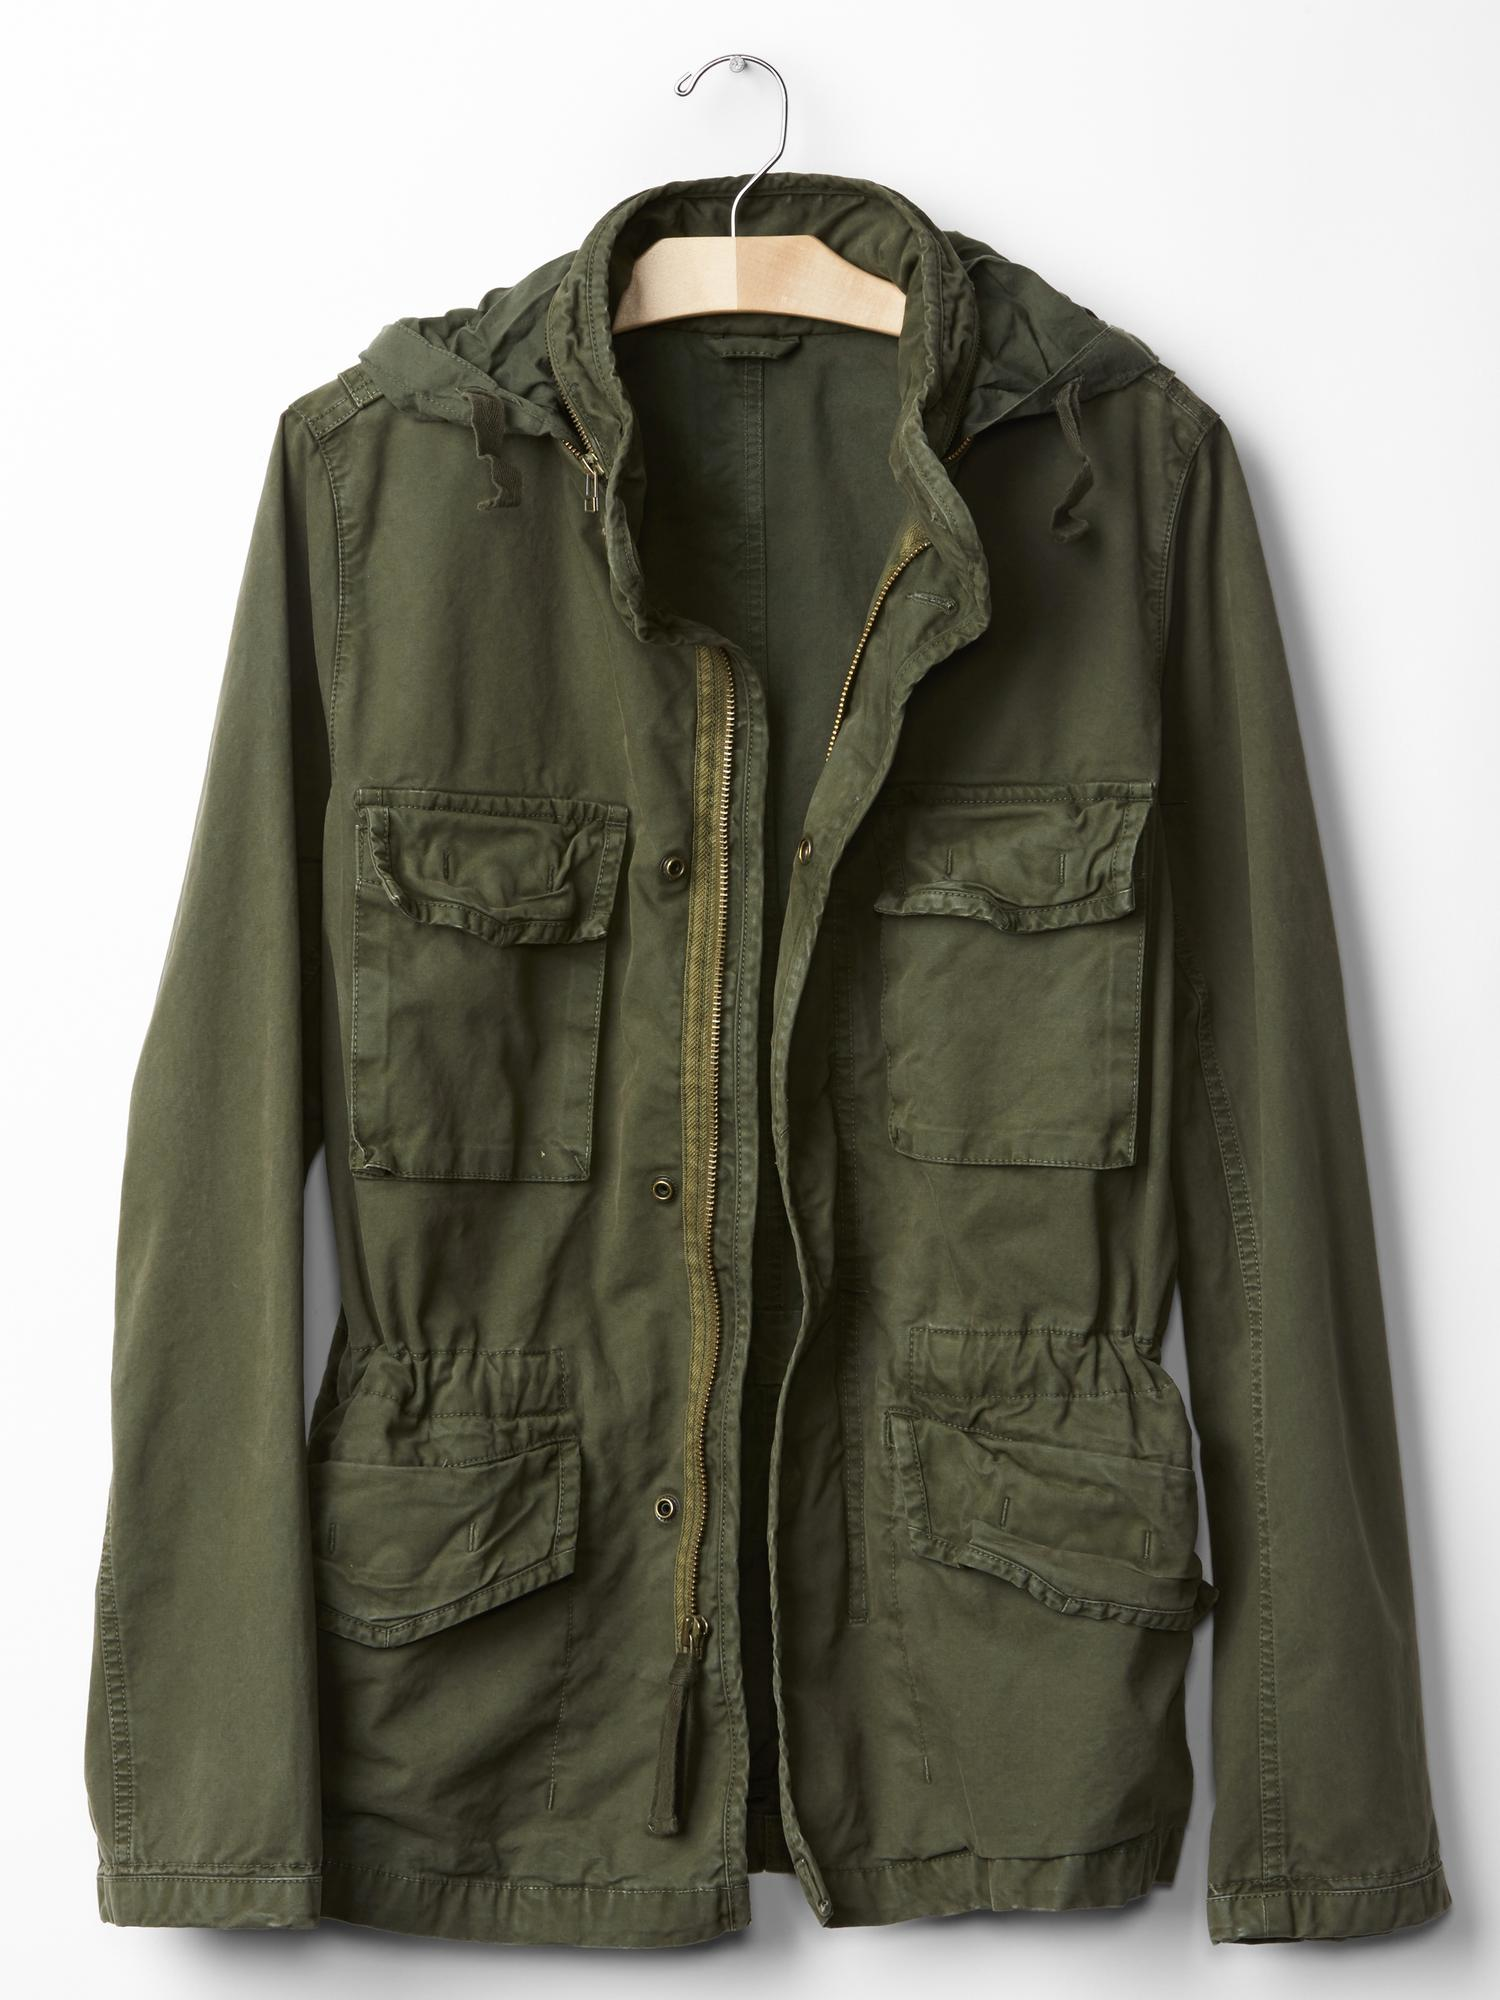 See? 32+ Facts Of Army Fatigue Jacket With Hood They Missed to Share You.